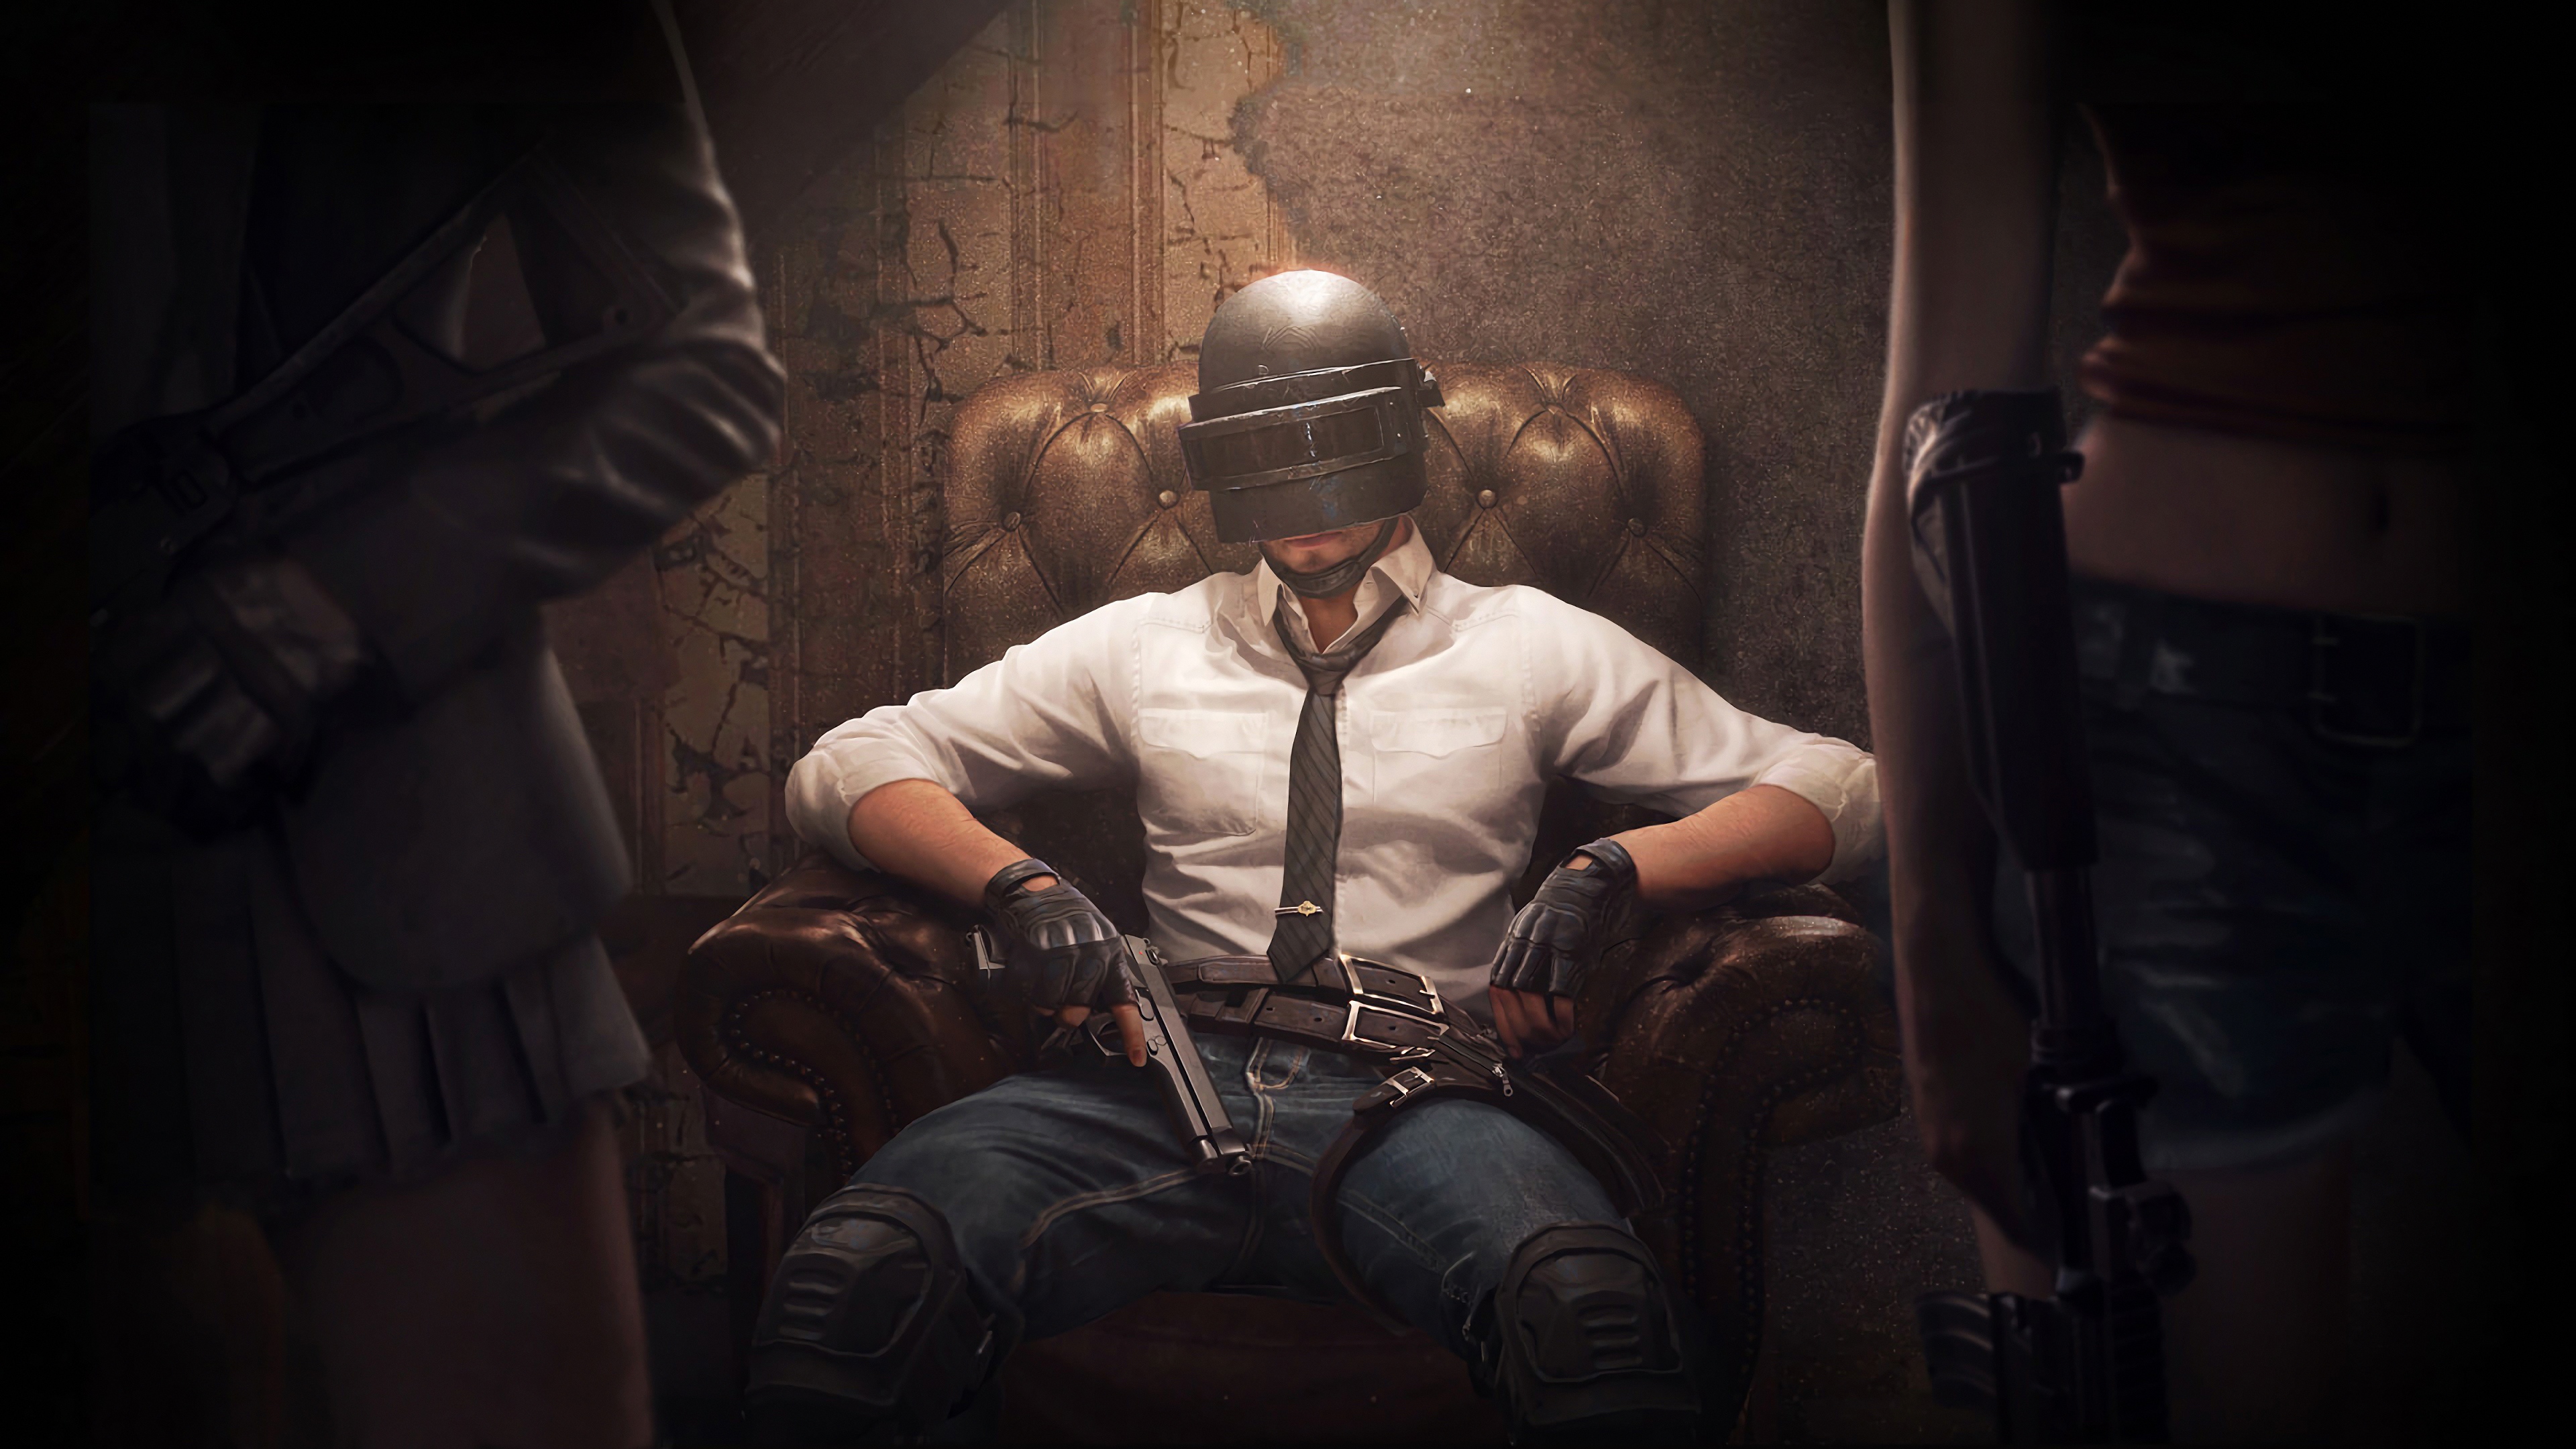 Pubg Android Game 4k Wallpaper,HD Games Wallpapers,4k Wallpapers,Images